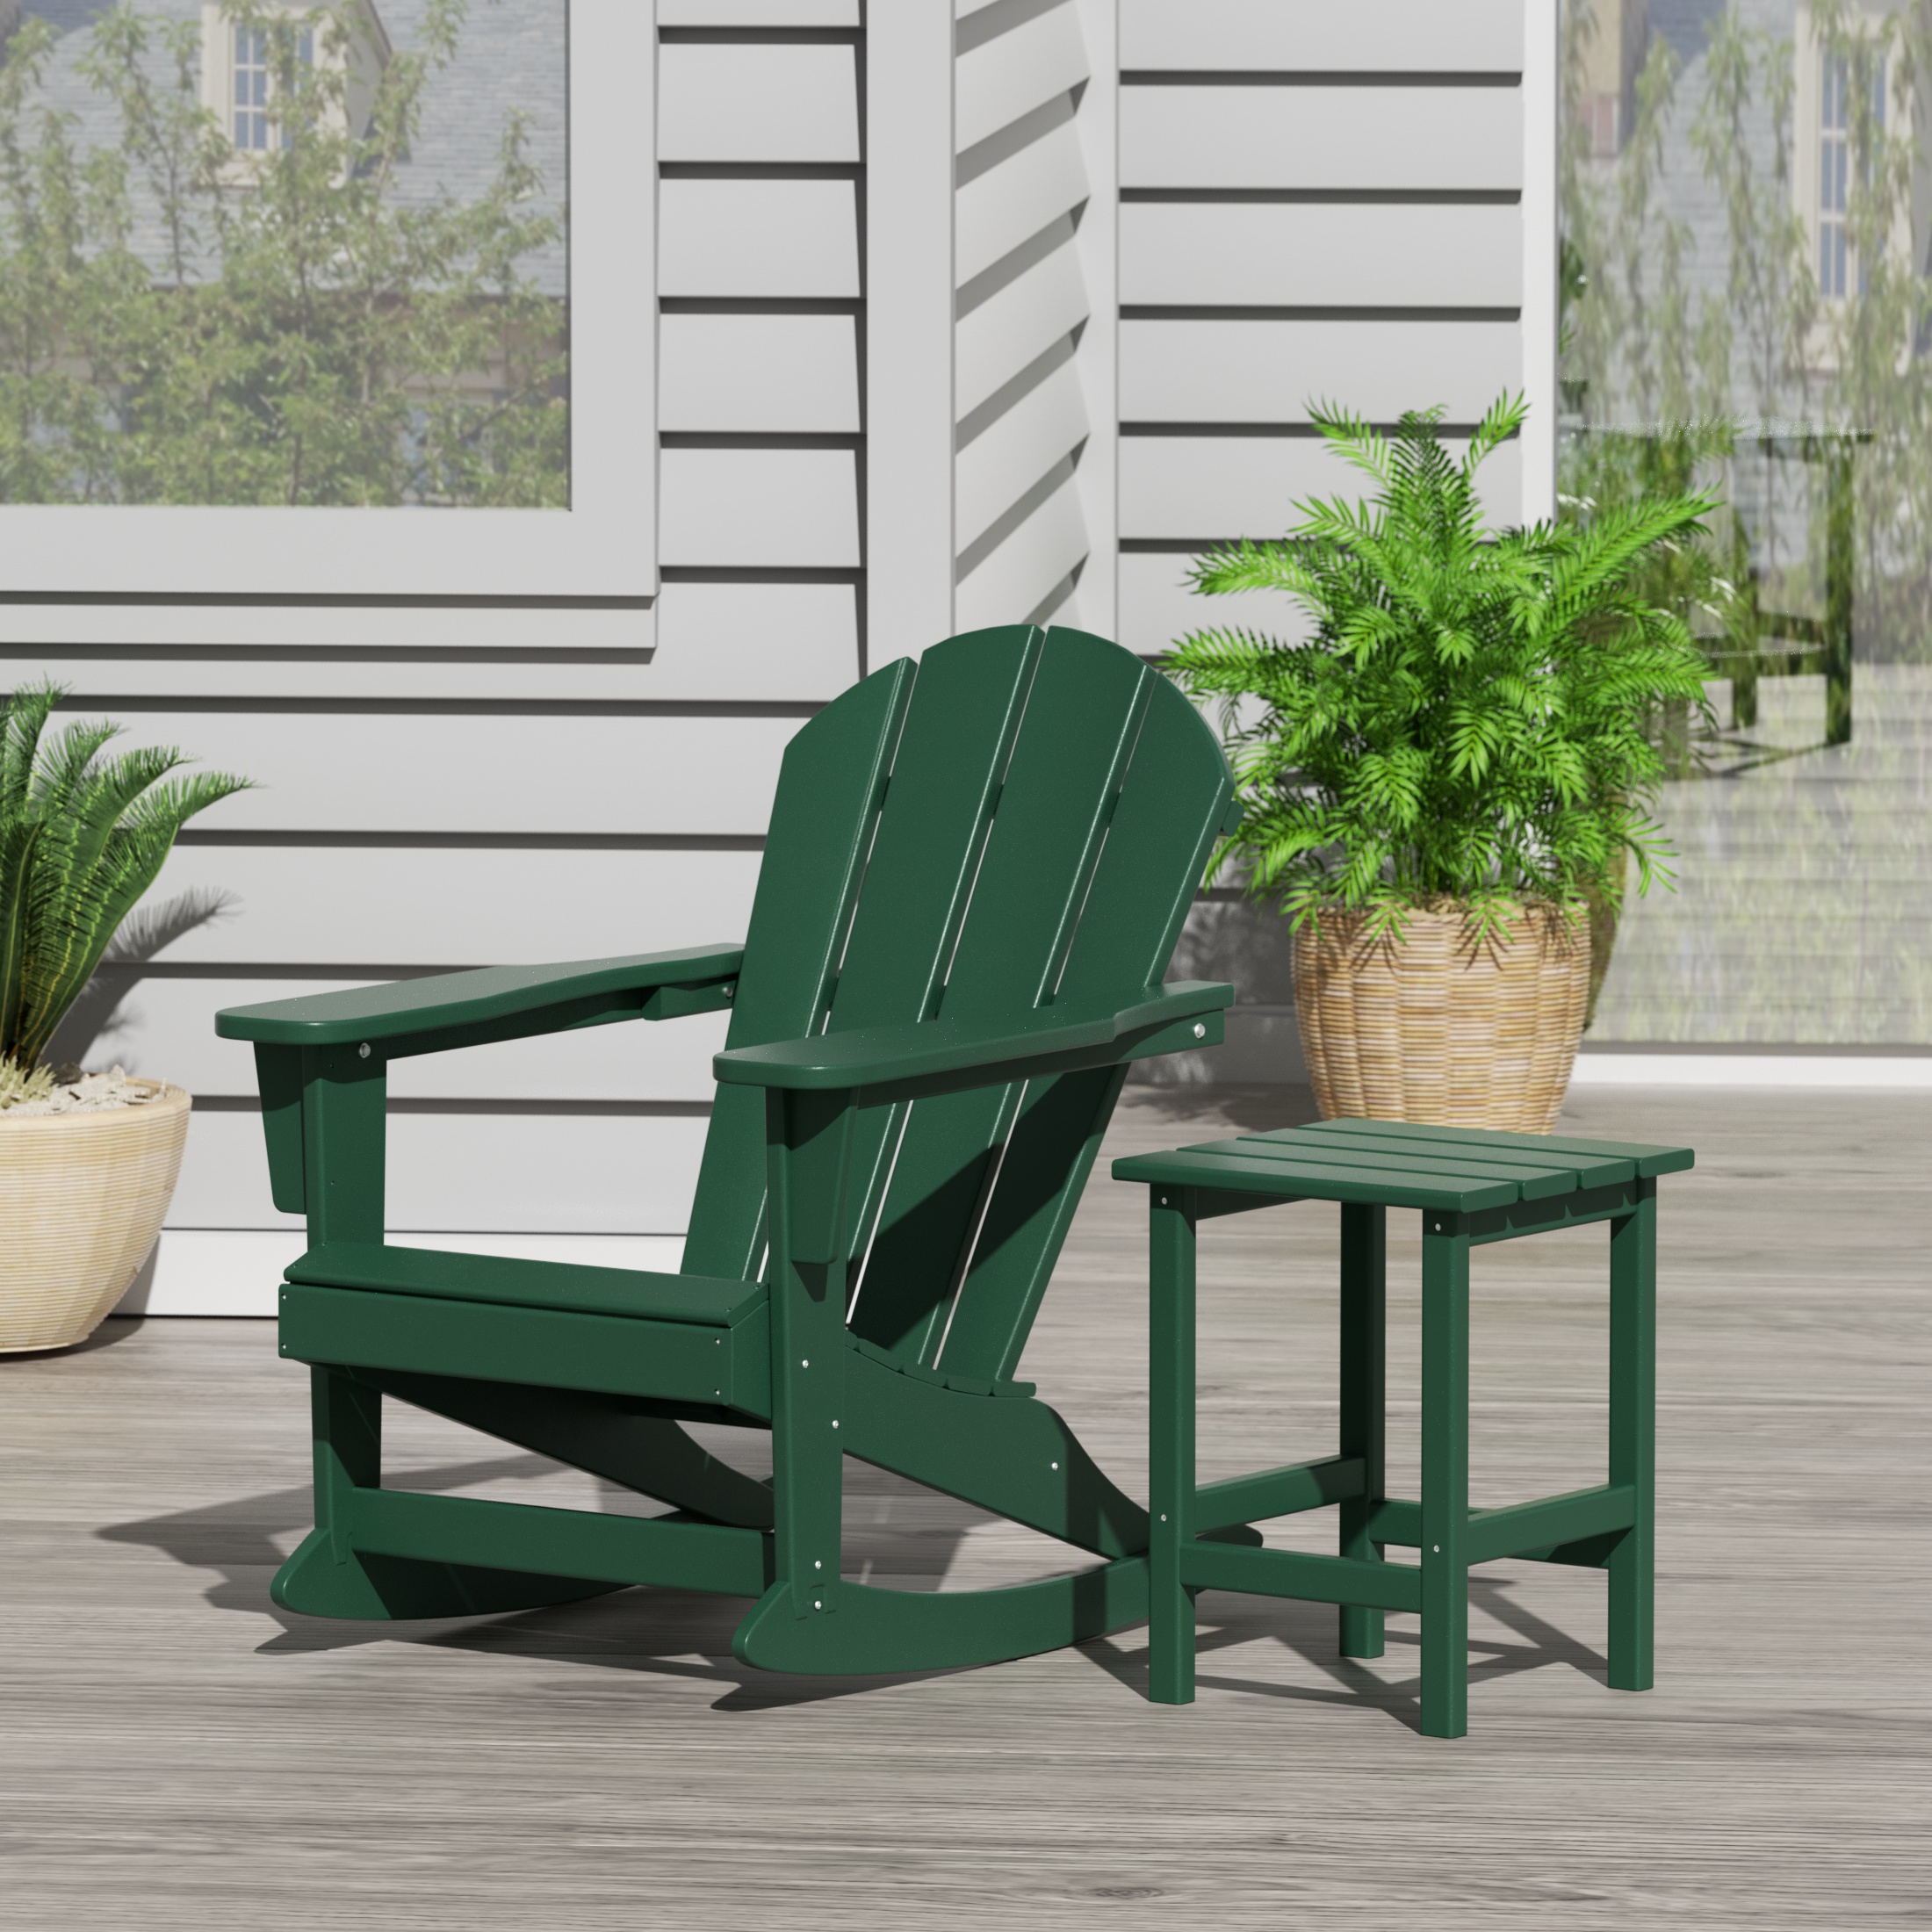 WestinTrends Malibu 3 Piece Outdoor Rocking Chair Set, All Weather Poly Lumber Porch Patio Adirondack Rocking Chair Set of 2 with Side Table, Dark Green - image 3 of 8